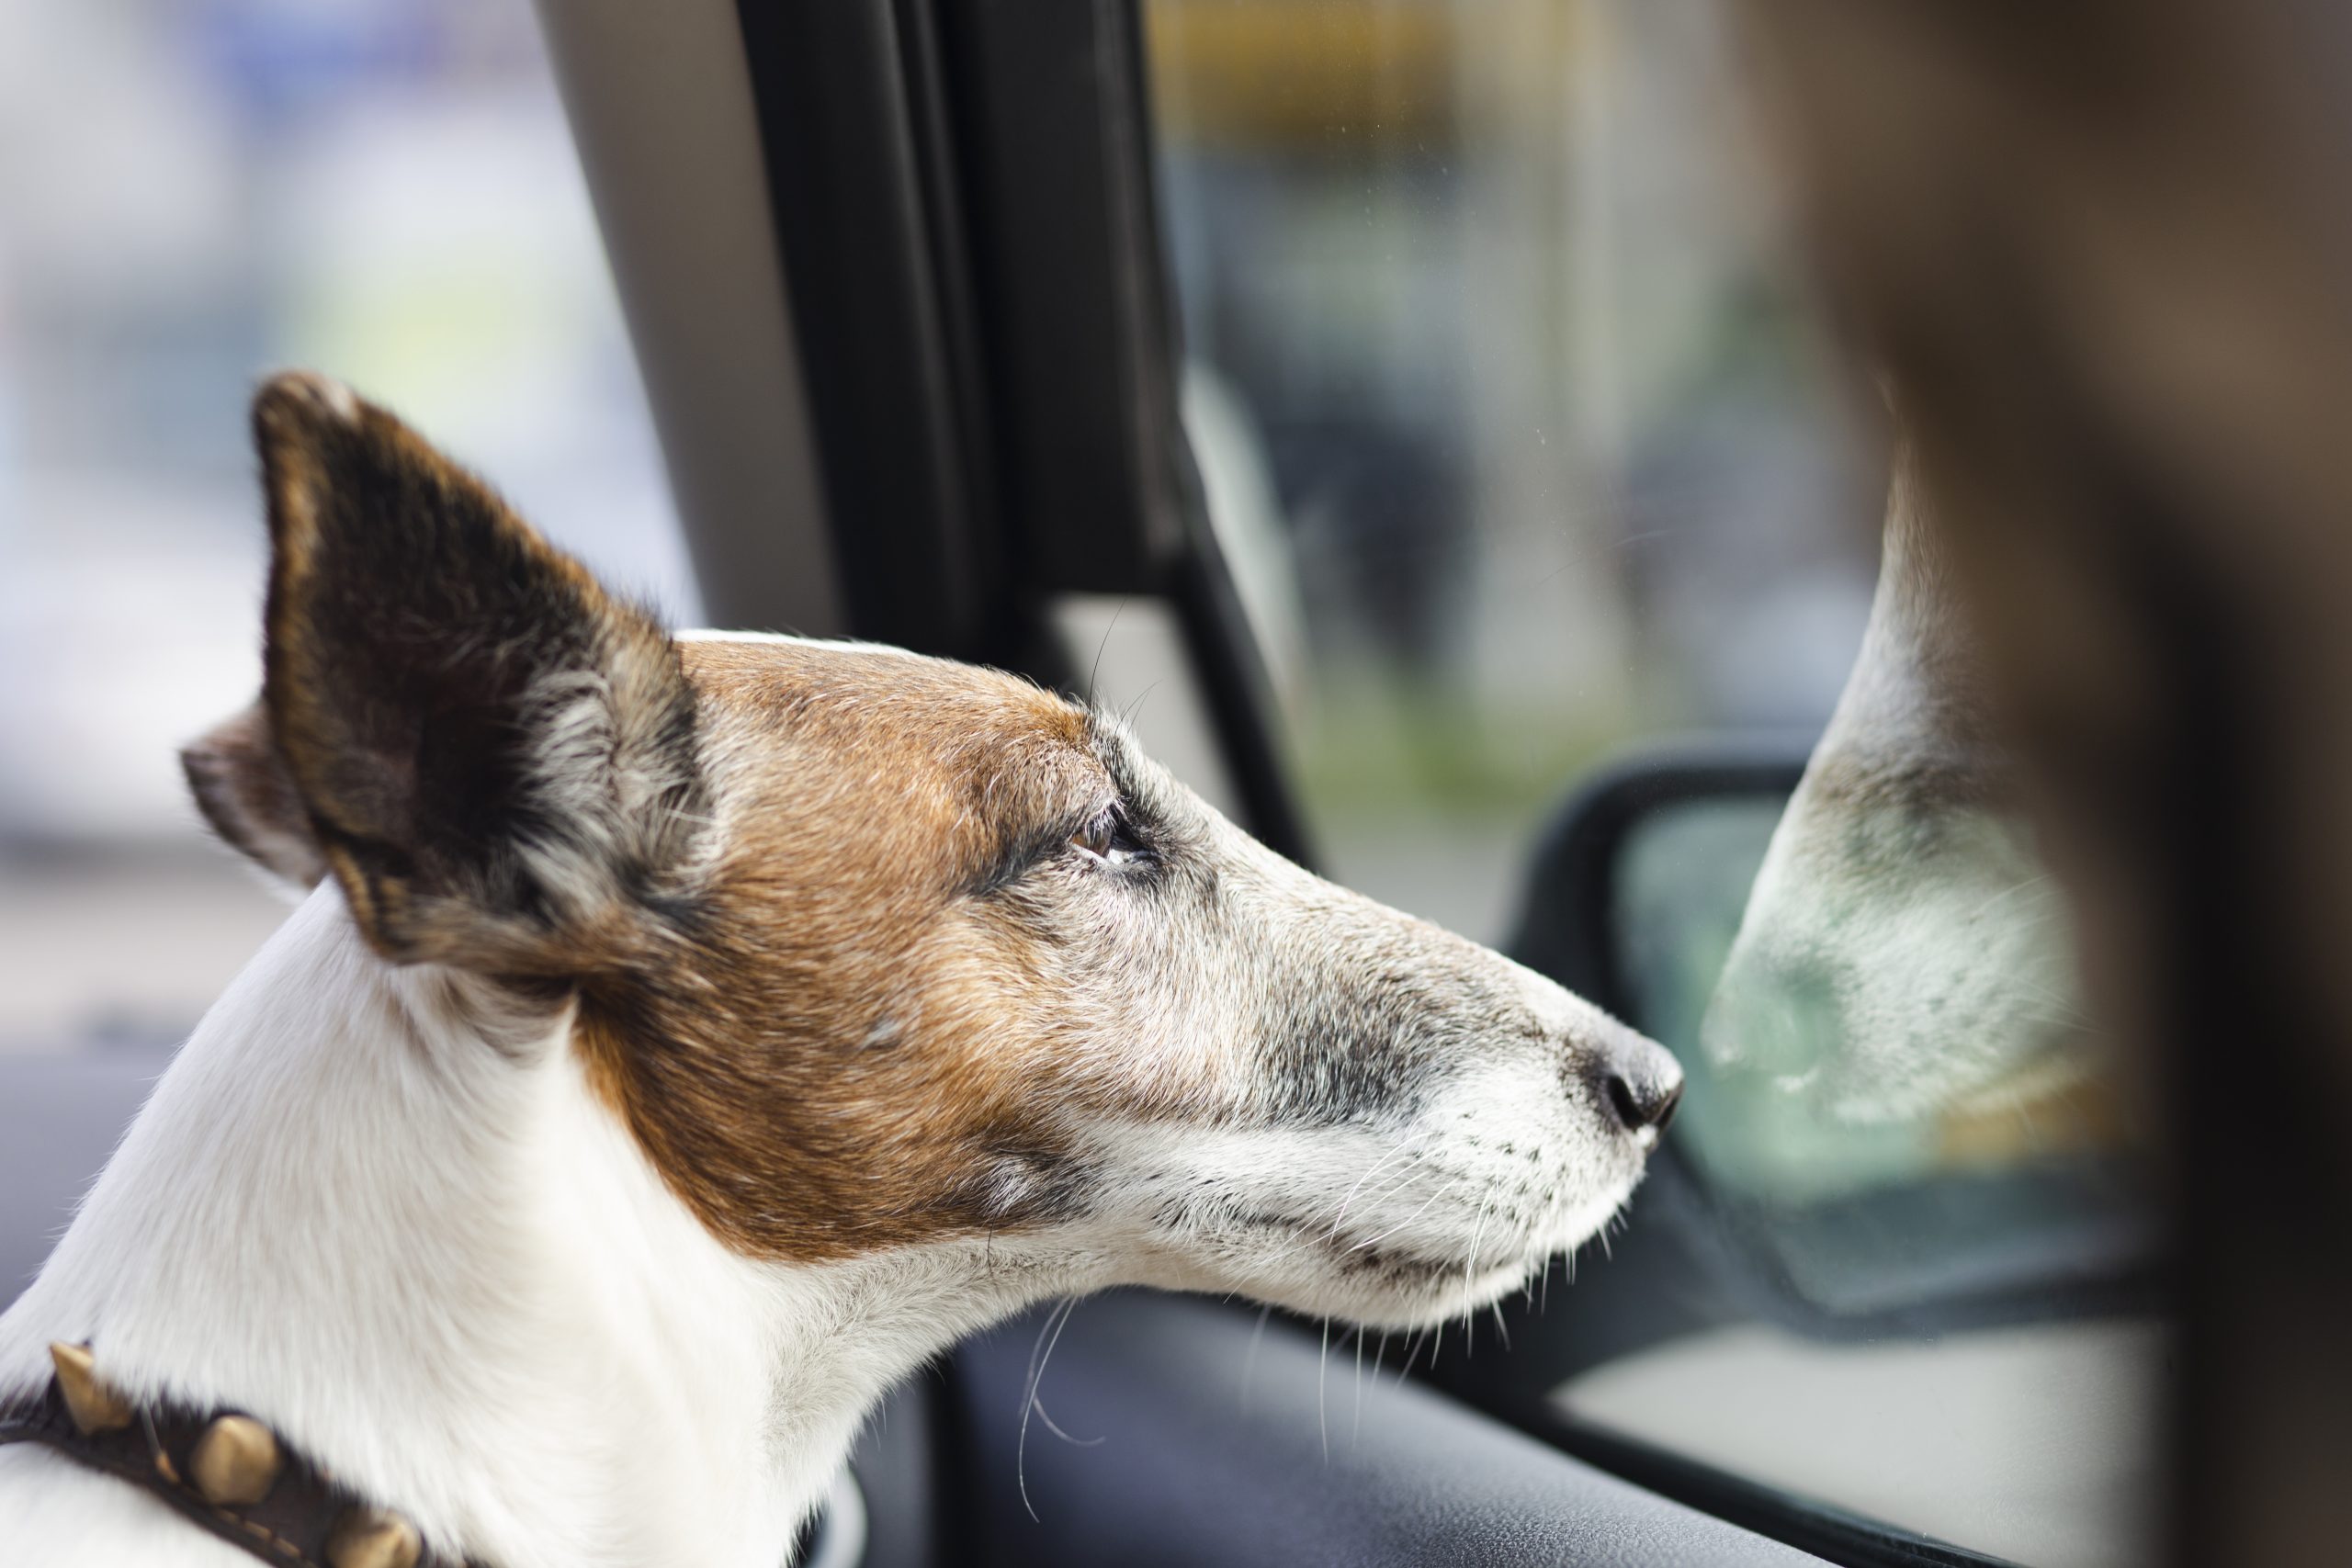 Jack Russell dog looking out car window